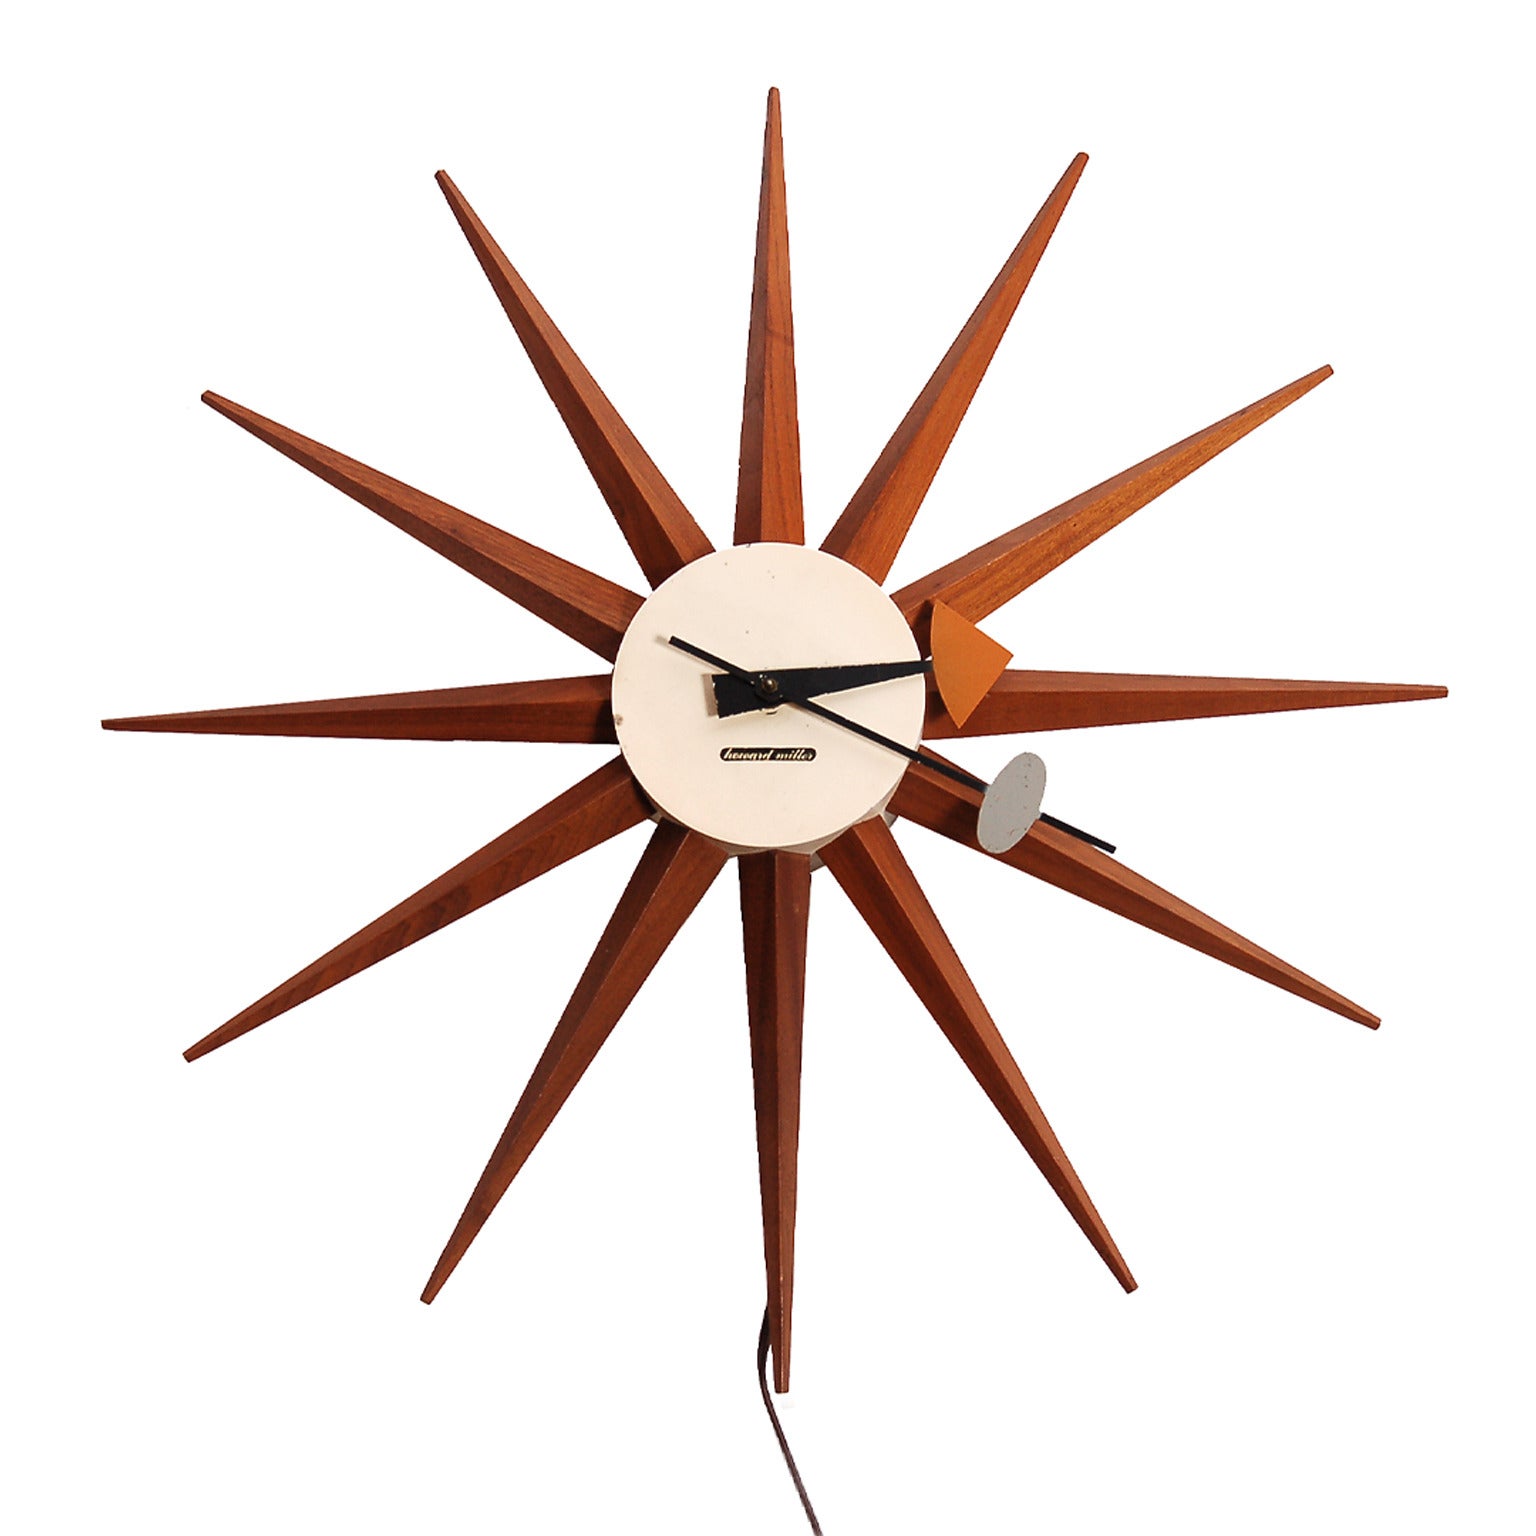 Early Wall Clock by George Nelson